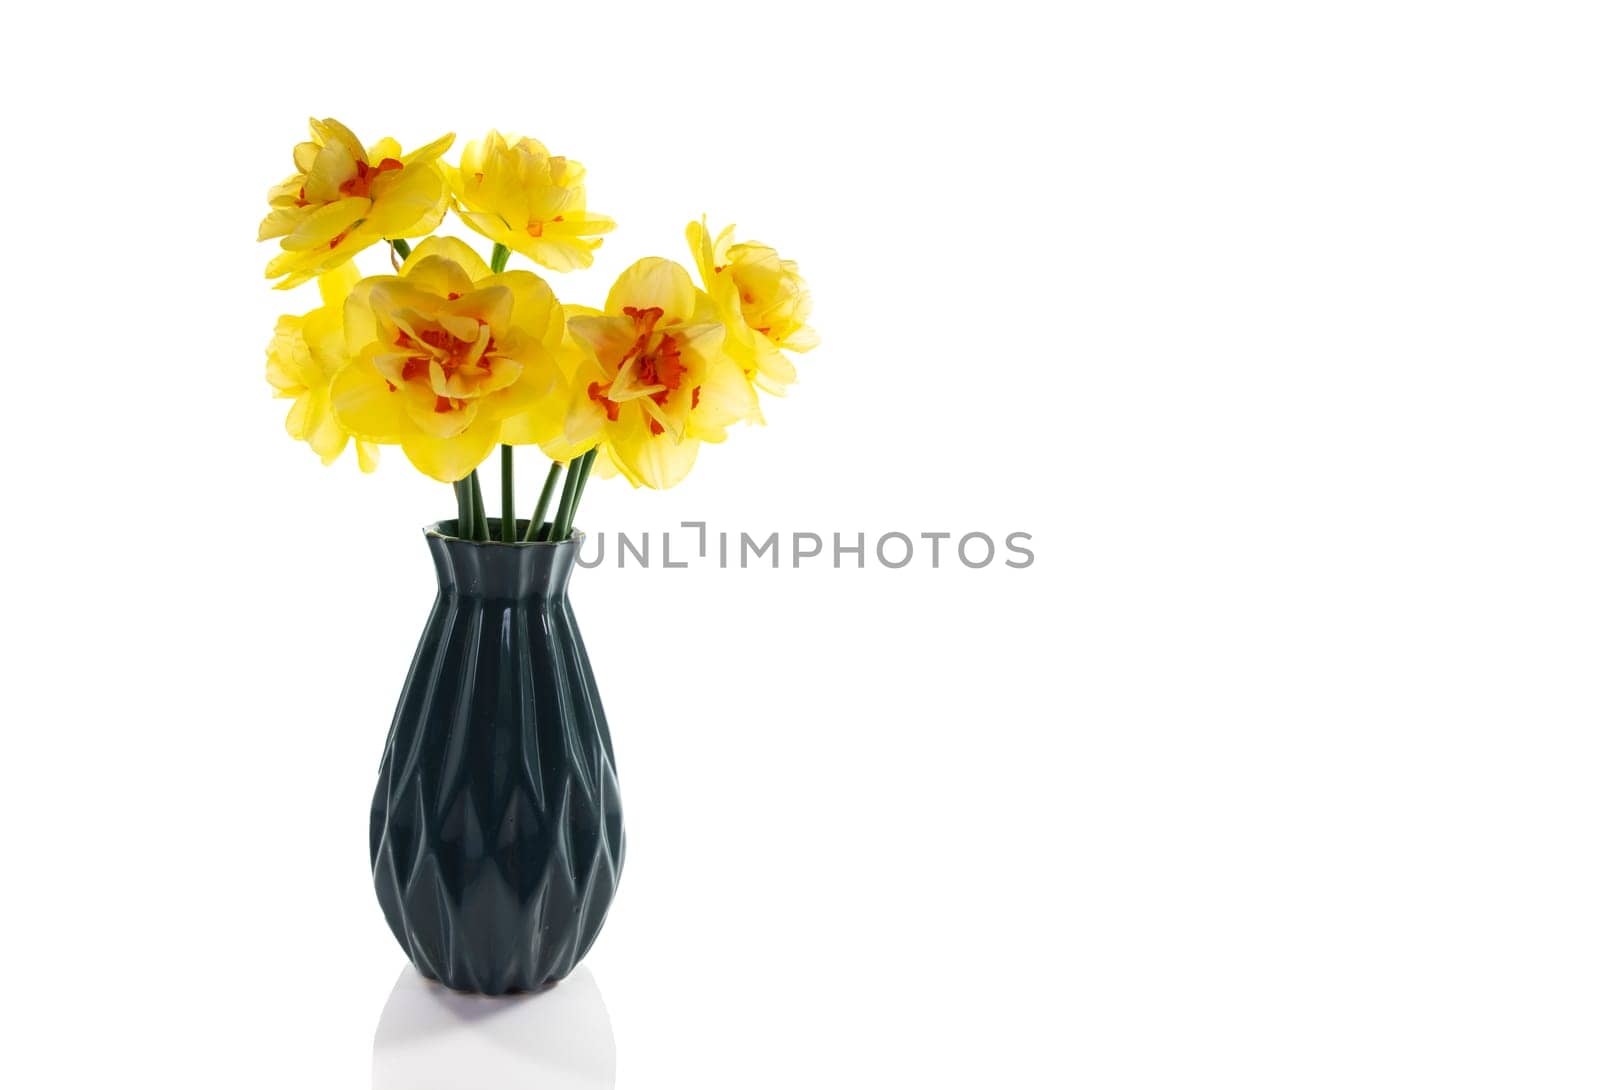 a still life with a blue vase with yellow daffodils with an orange heart on a white background isolated